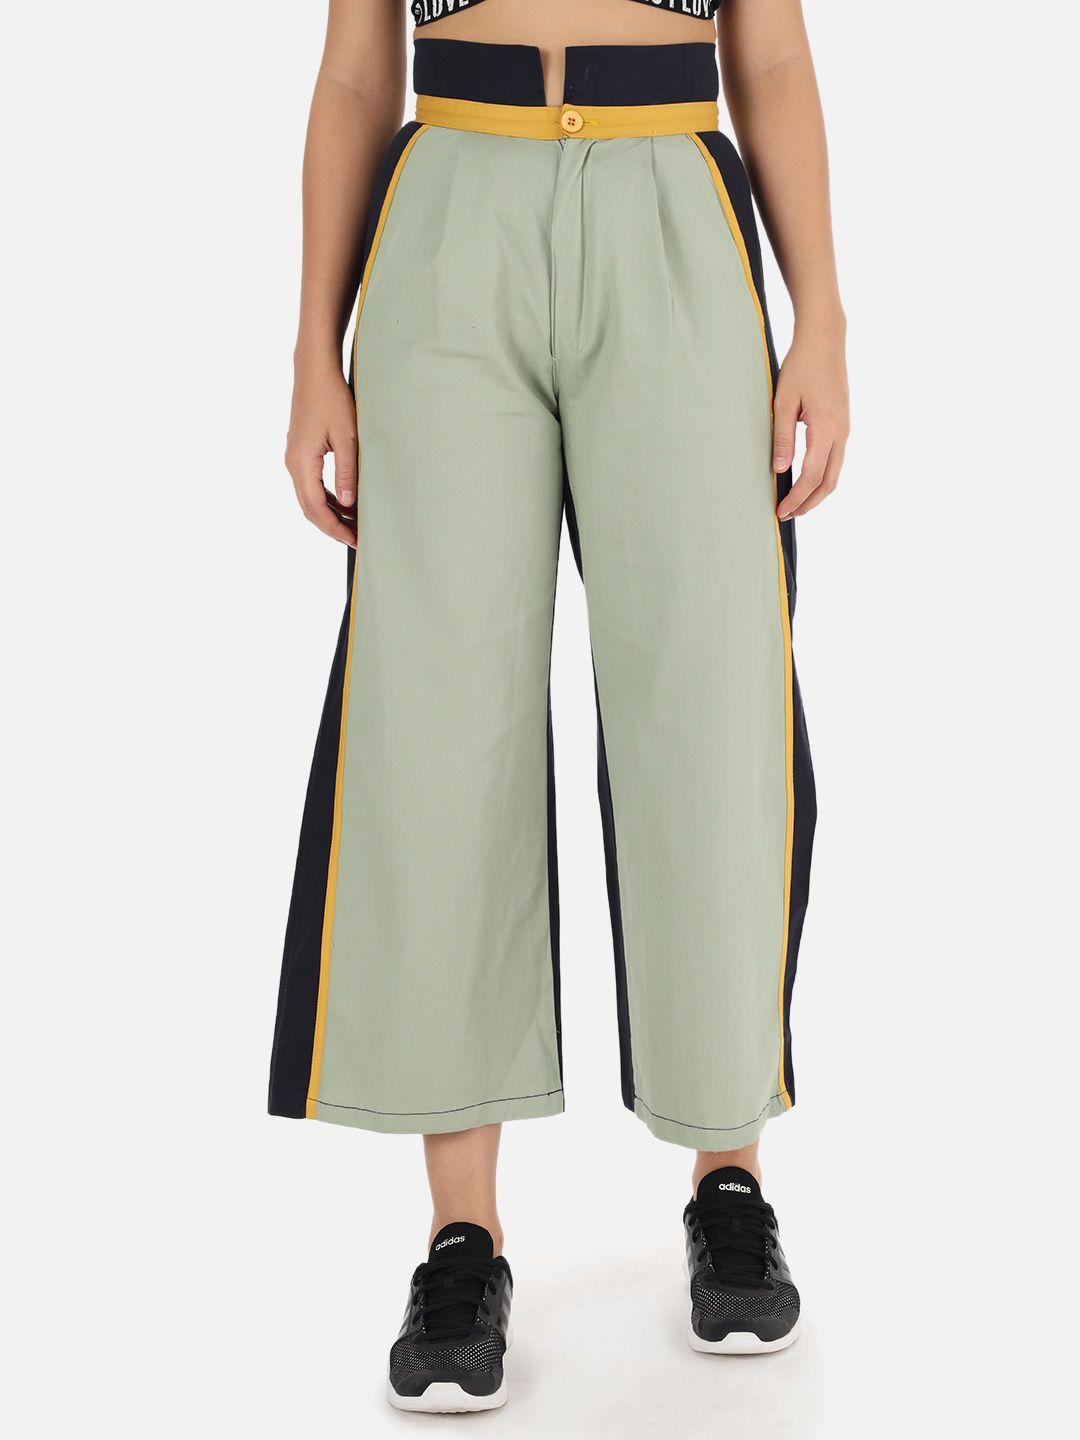 the dry state women sea green & navy blue colourblocked loose fit parallel trousers